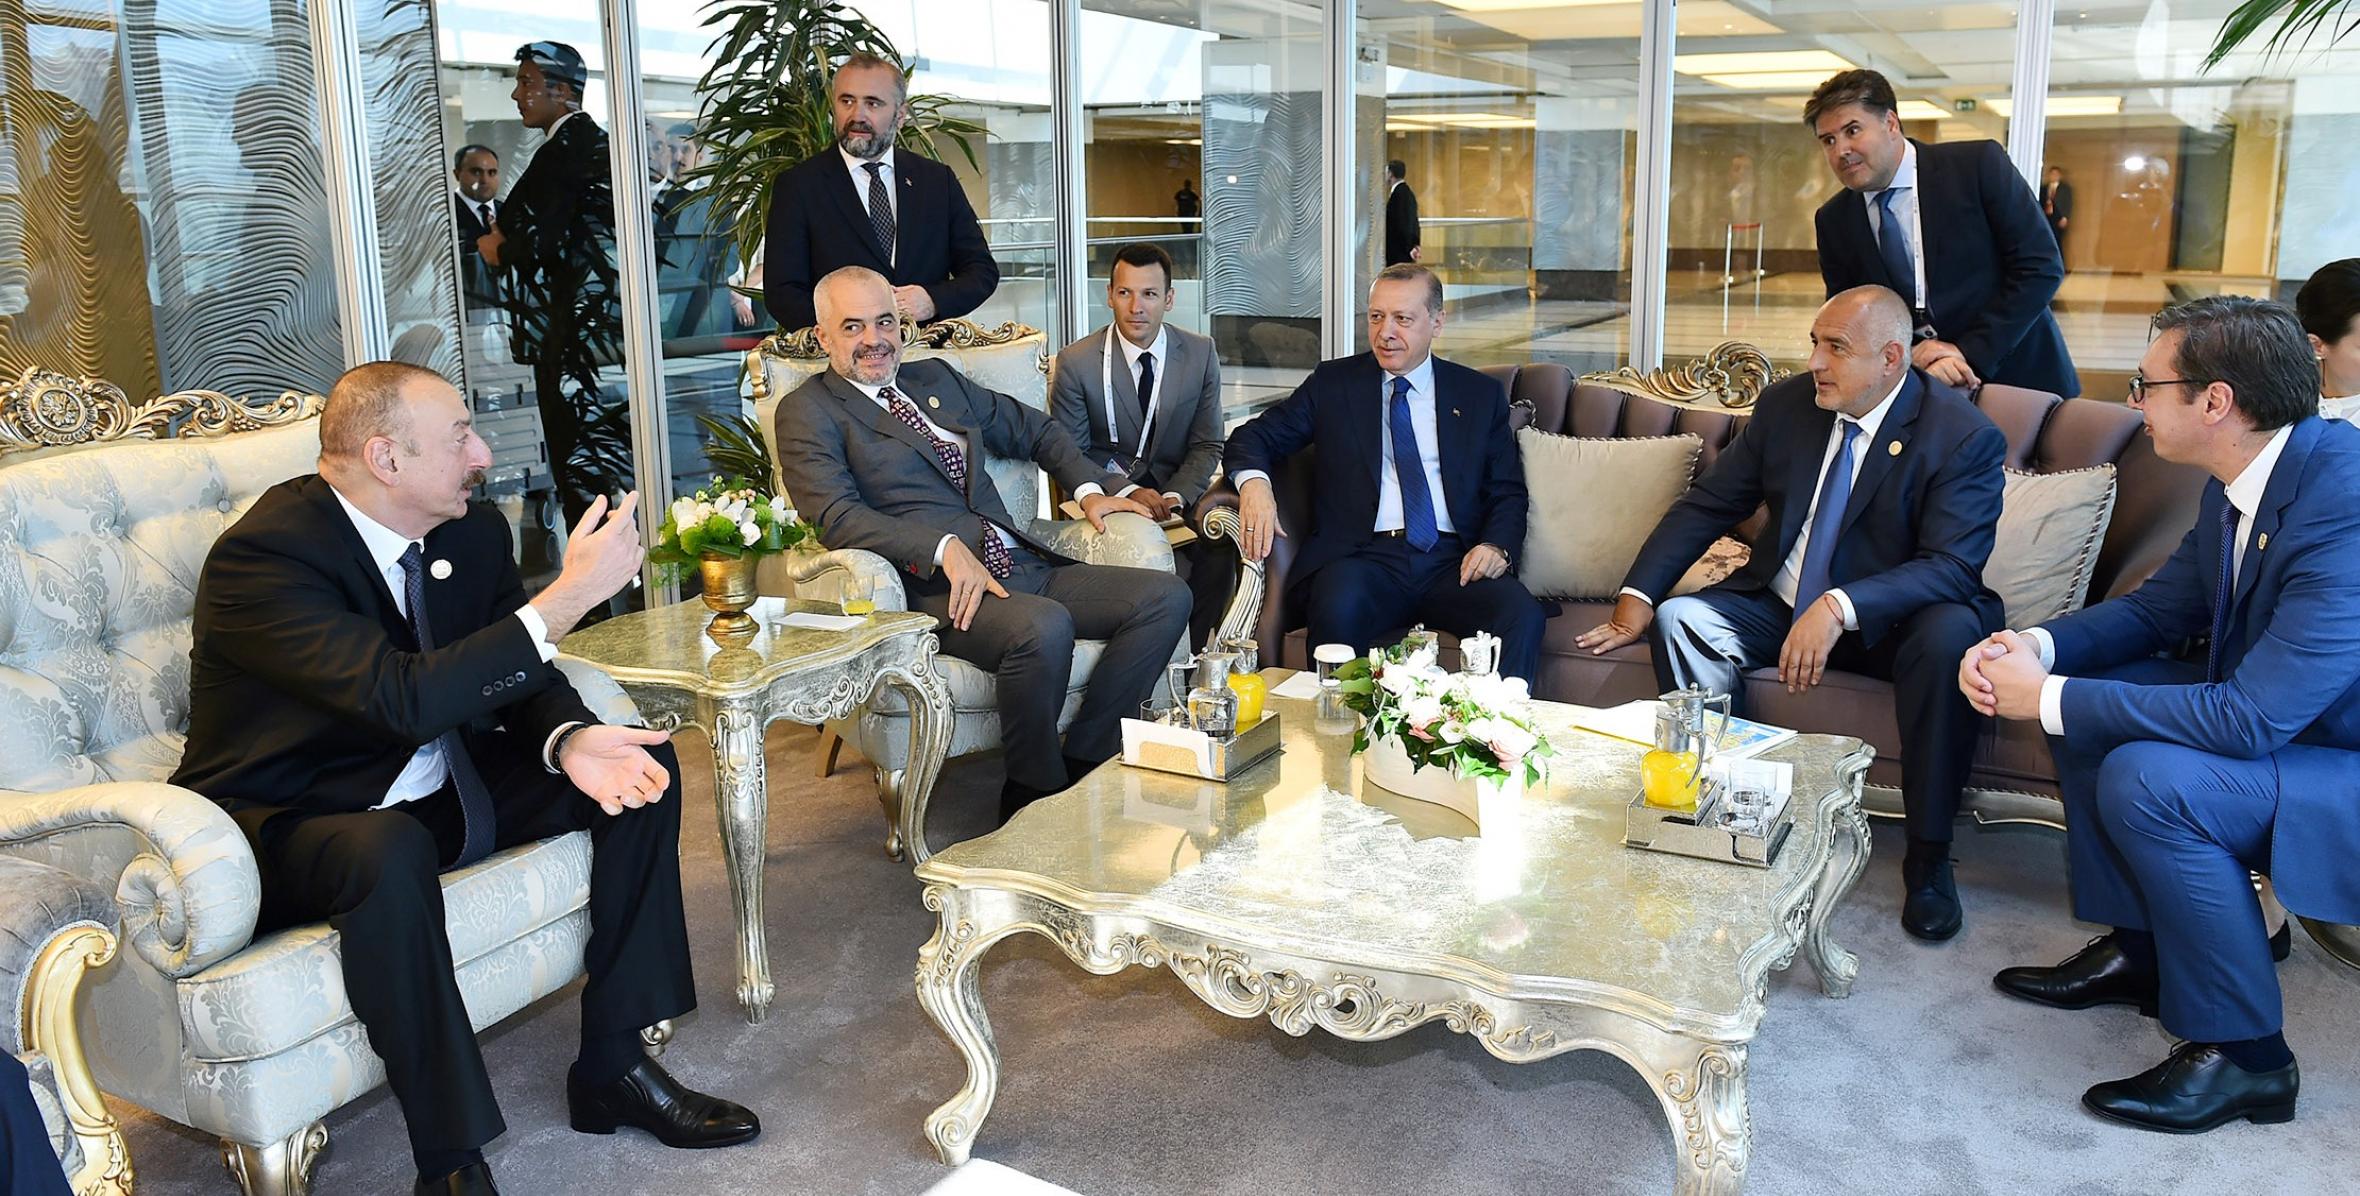 Ilham Aliyev, President Recep Tayyip Erdogan and heads of state and government attending 22nd World Petroleum Congress had a brief talk